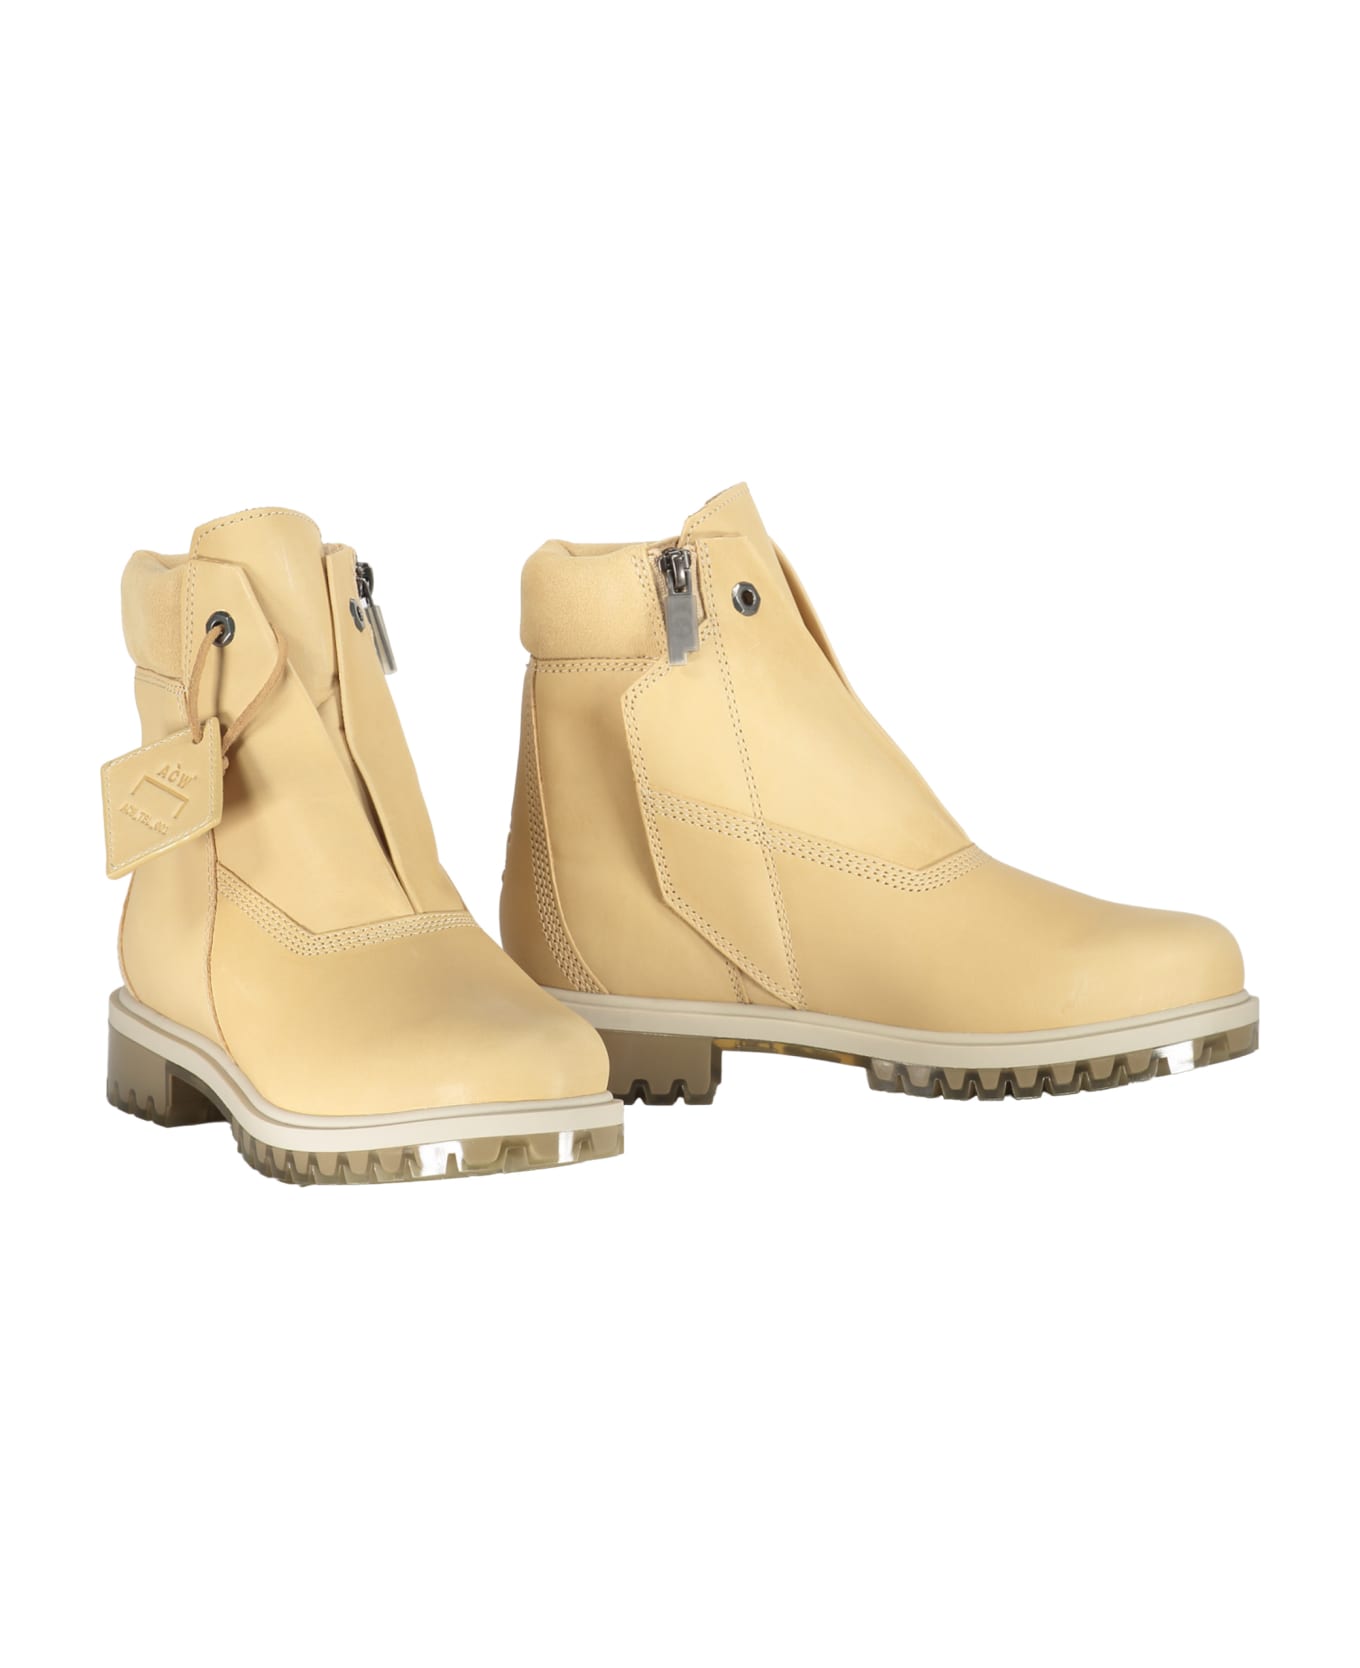 A-COLD-WALL X Timberland Leather Boots - Beige